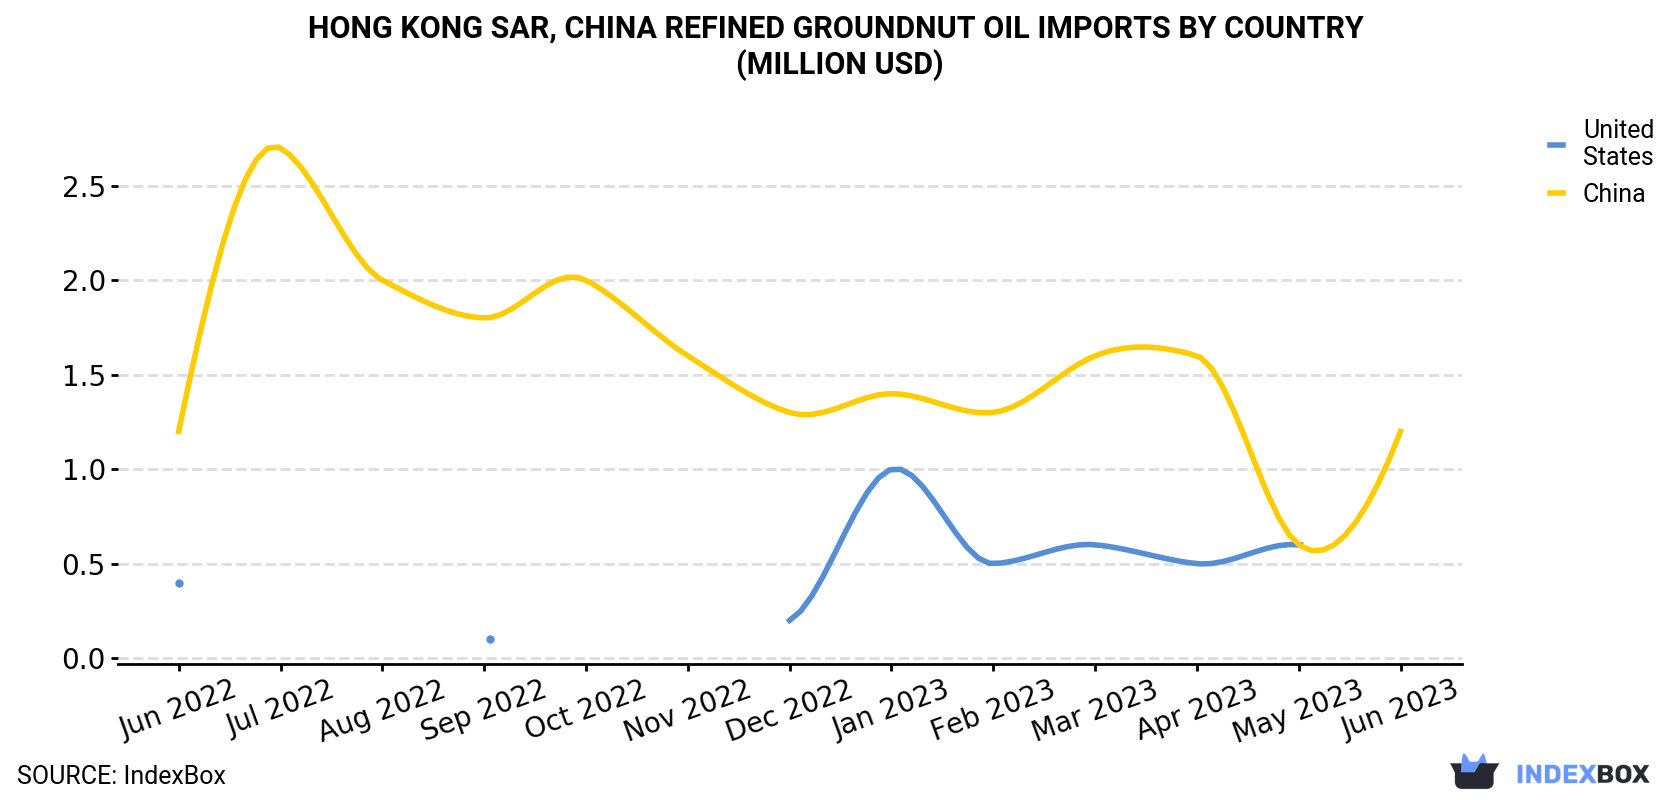 Hong Kong Refined Groundnut Oil Imports By Country (Million USD)